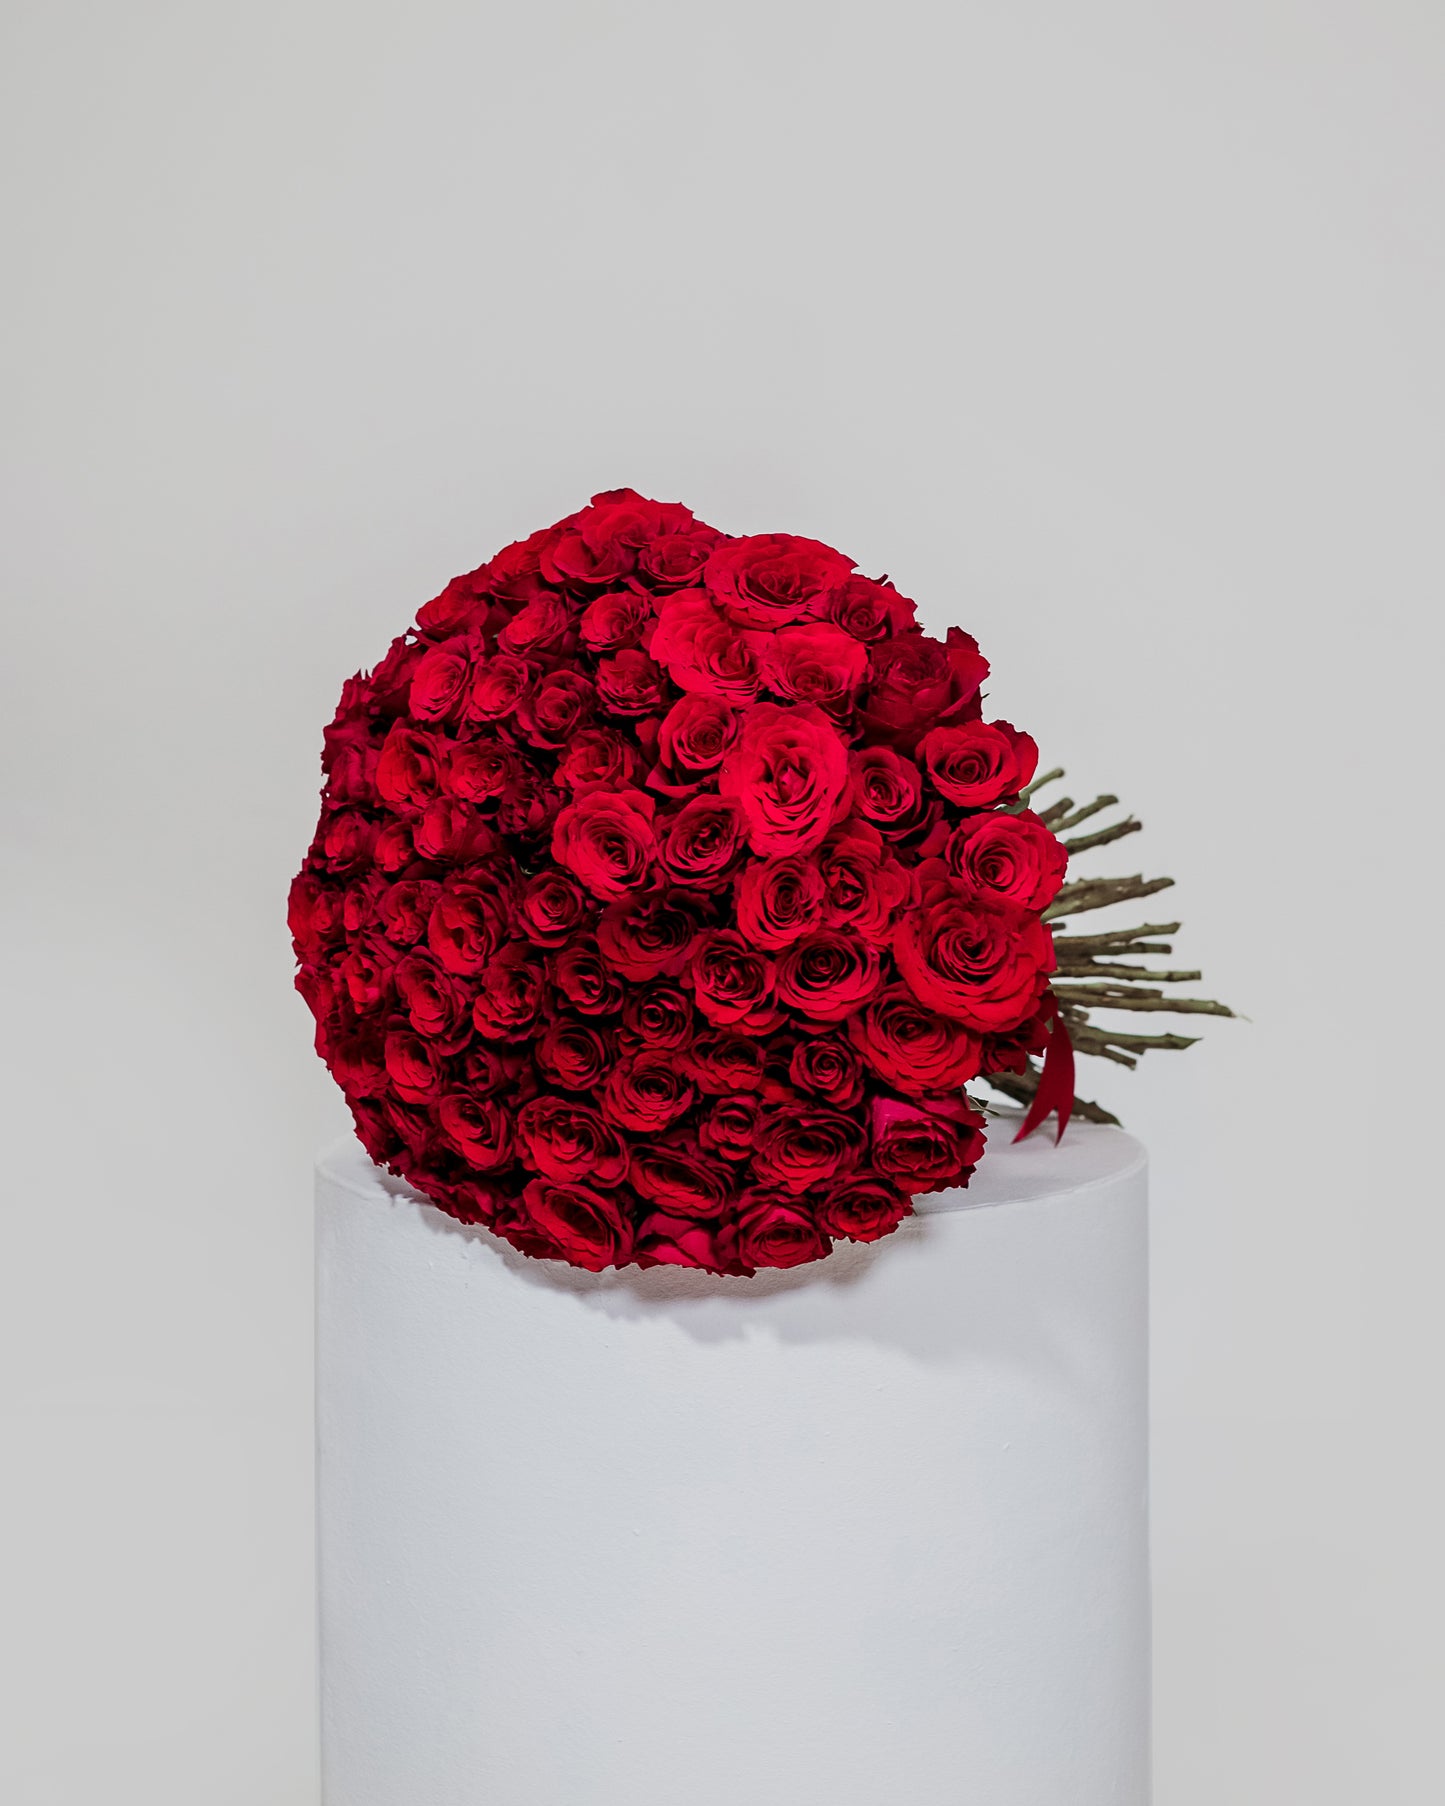 An extravagant bouquet featuring 75 rich red roses, symbolizing deep love and devotion for Valentine's Day.